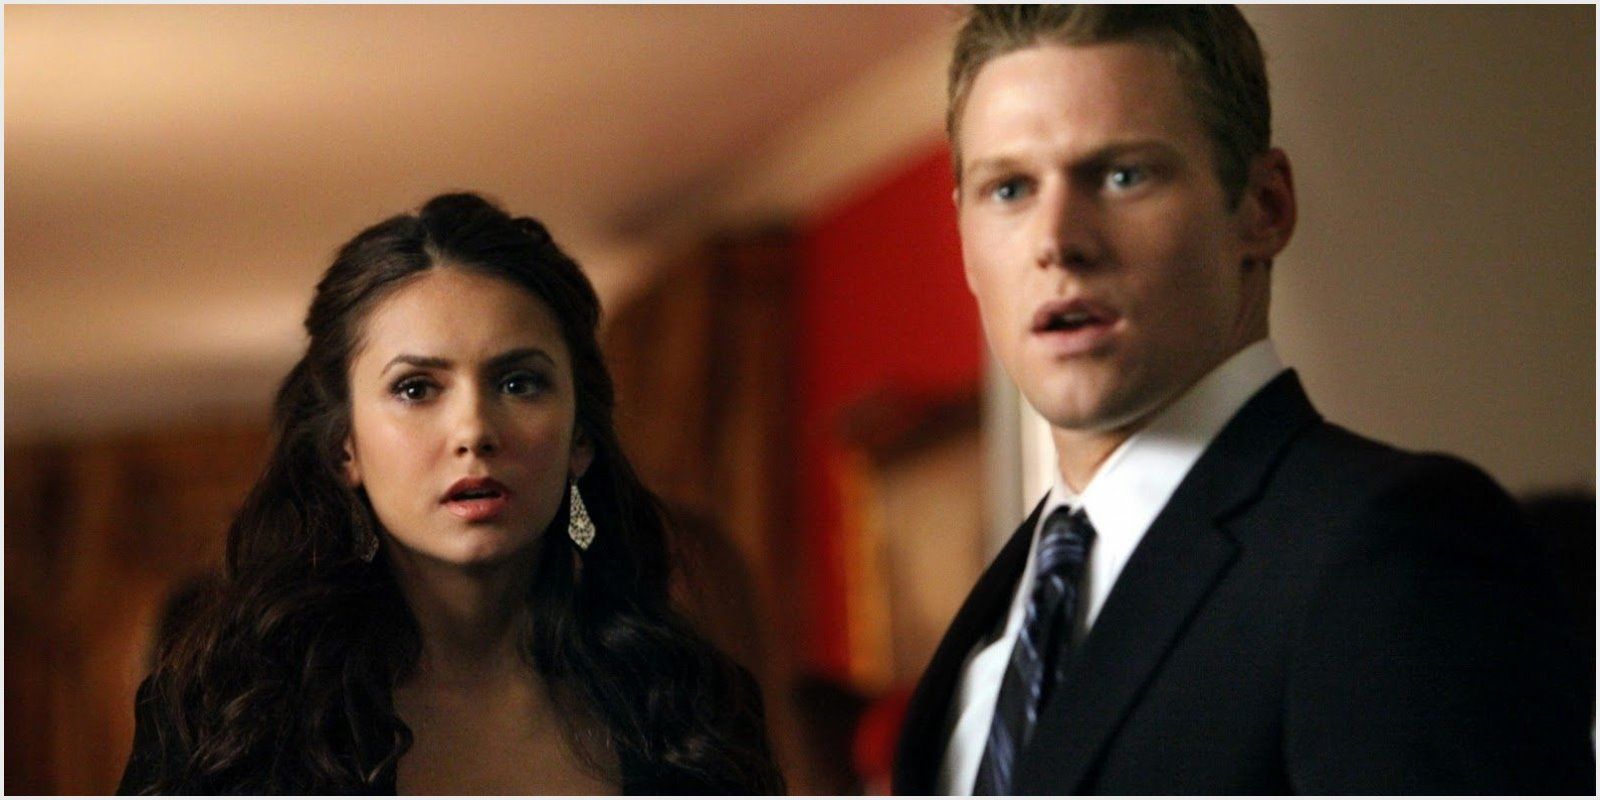 Image of Elena Gilbert and Matt Donovan on The Vampire Diaries being surprised or stunned.